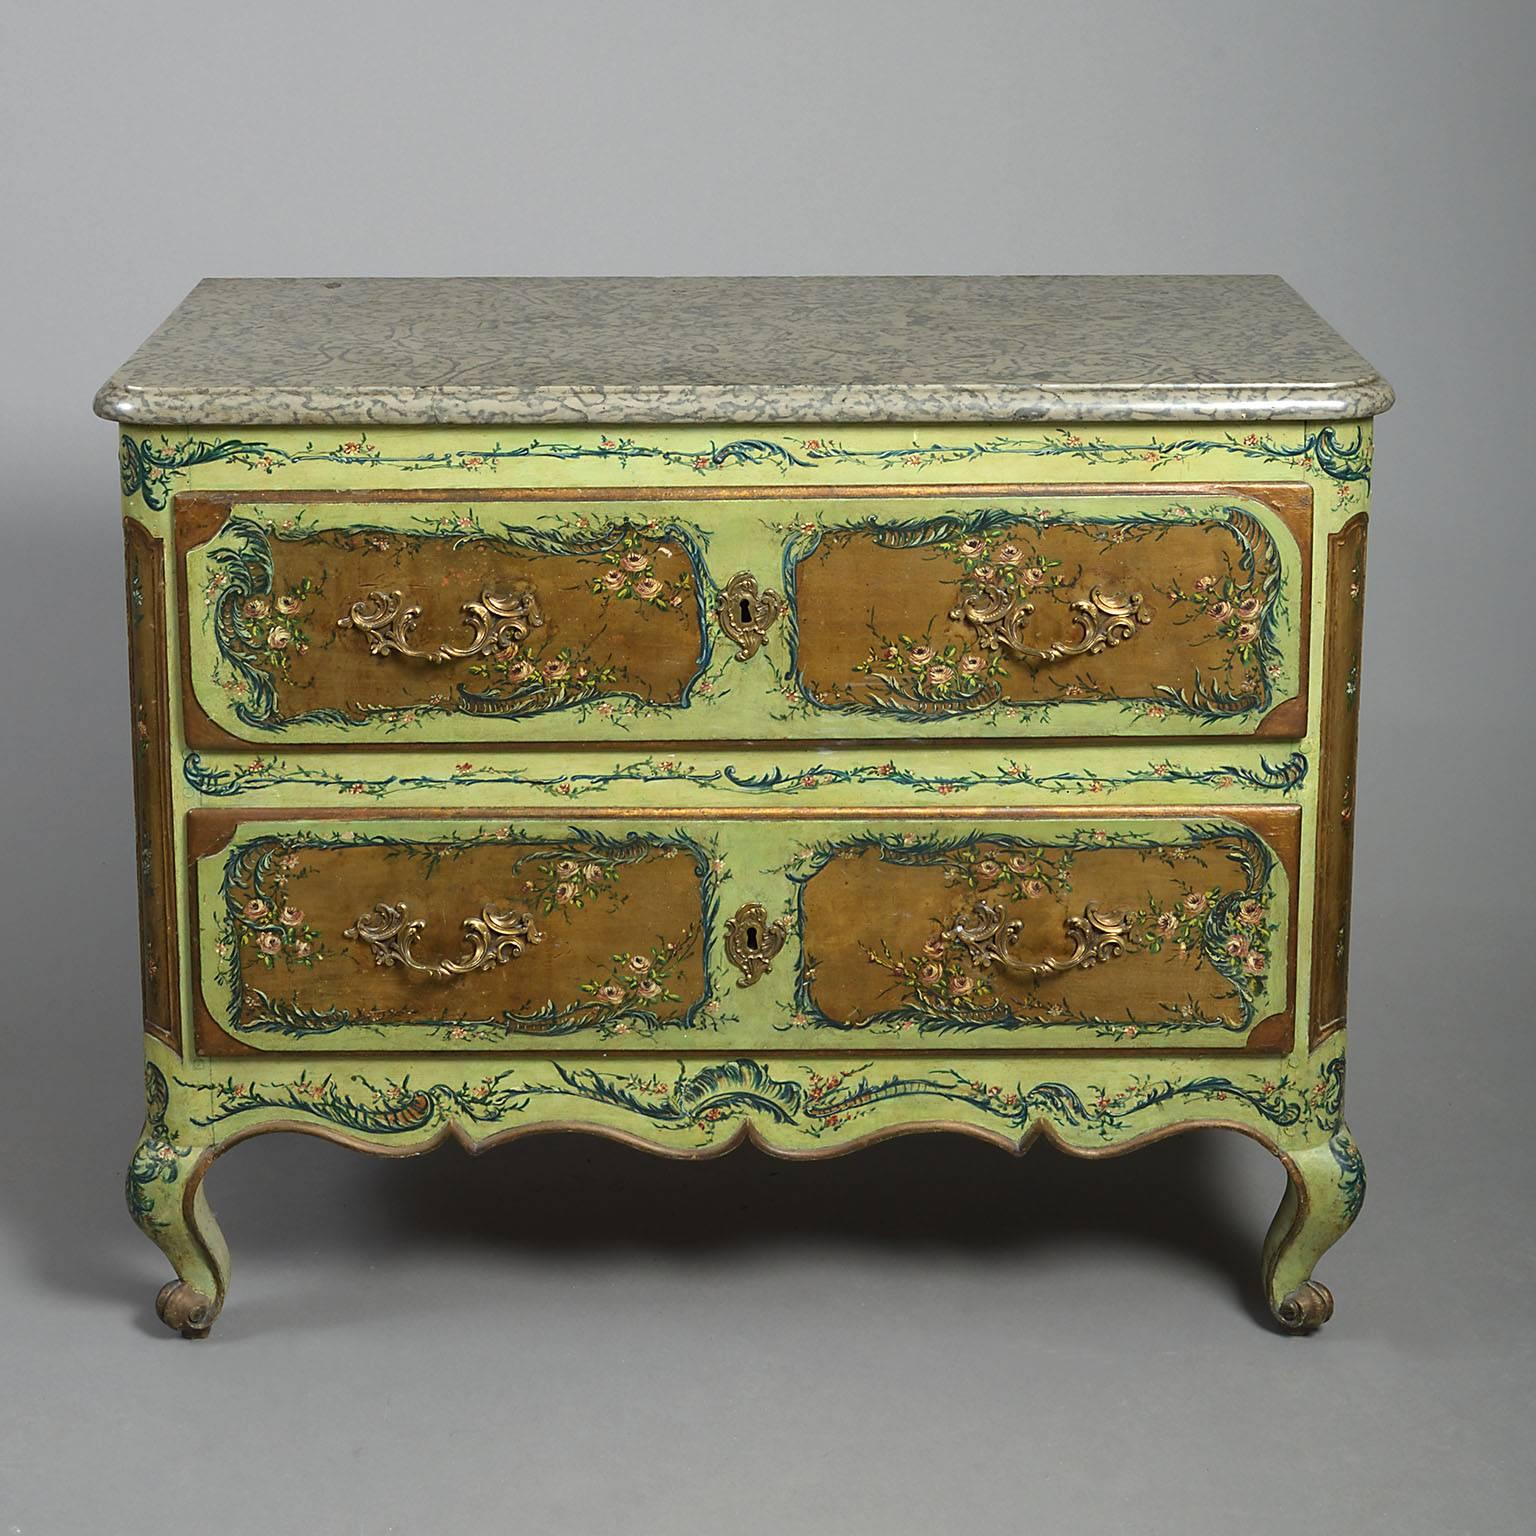 Louis XV Provincial painted commode

The mottled grey marble top above two drawers painted with rose-decked panels within green rococo borders and with well-cast rococo gilt-bronze handles and lock-plates, the panelled sides also painted with